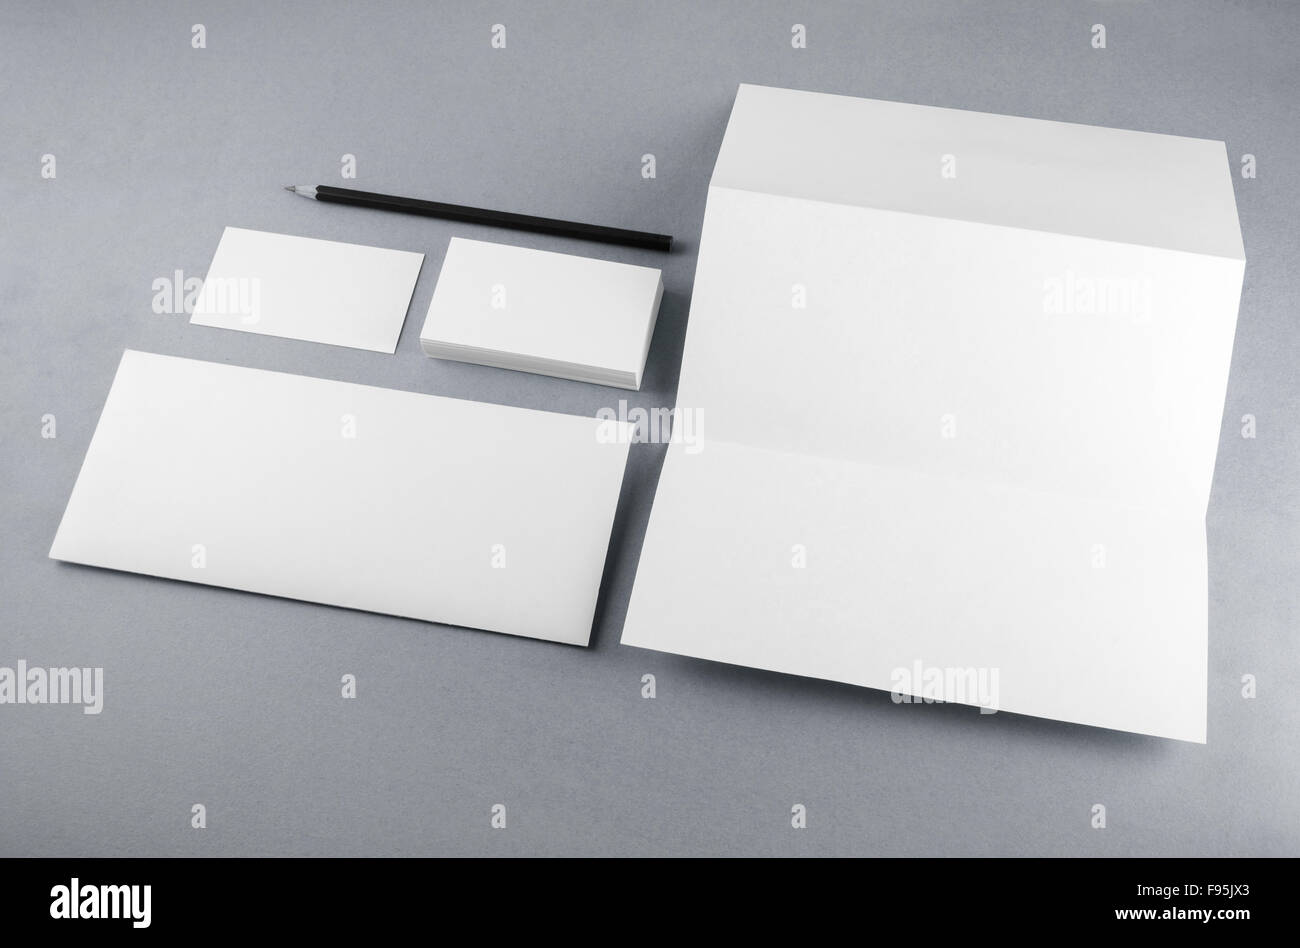 Blank stationery set on gray background. Template for branding identity. For design presentations and portfolios. Stock Photo